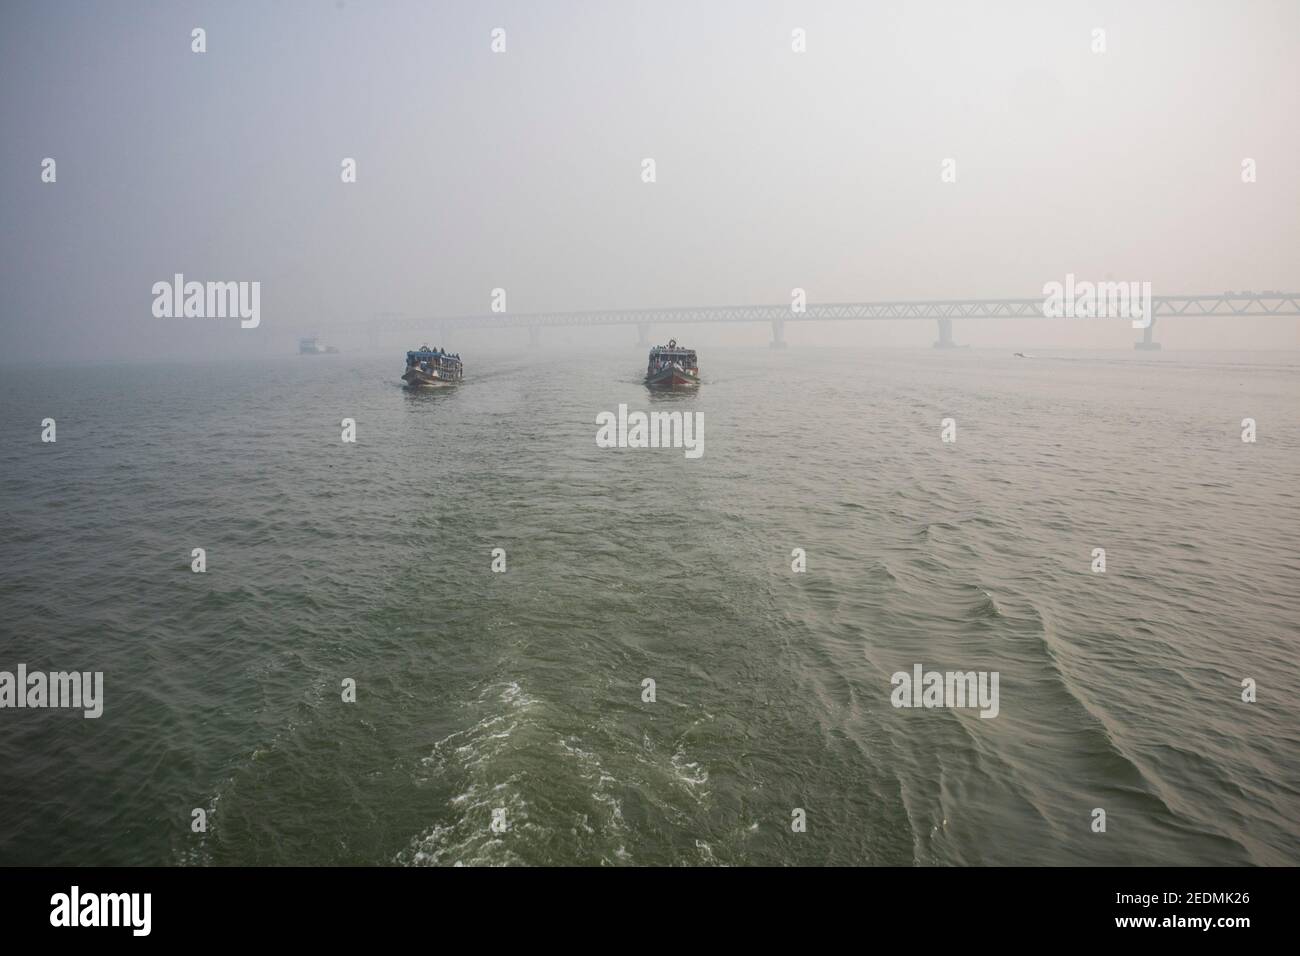 Bangladesh is a land of rivers. Water transport is one of the main  transport systems here. Lauch, Ferry, Boat and Speed boat is the main vehicle here. Stock Photo